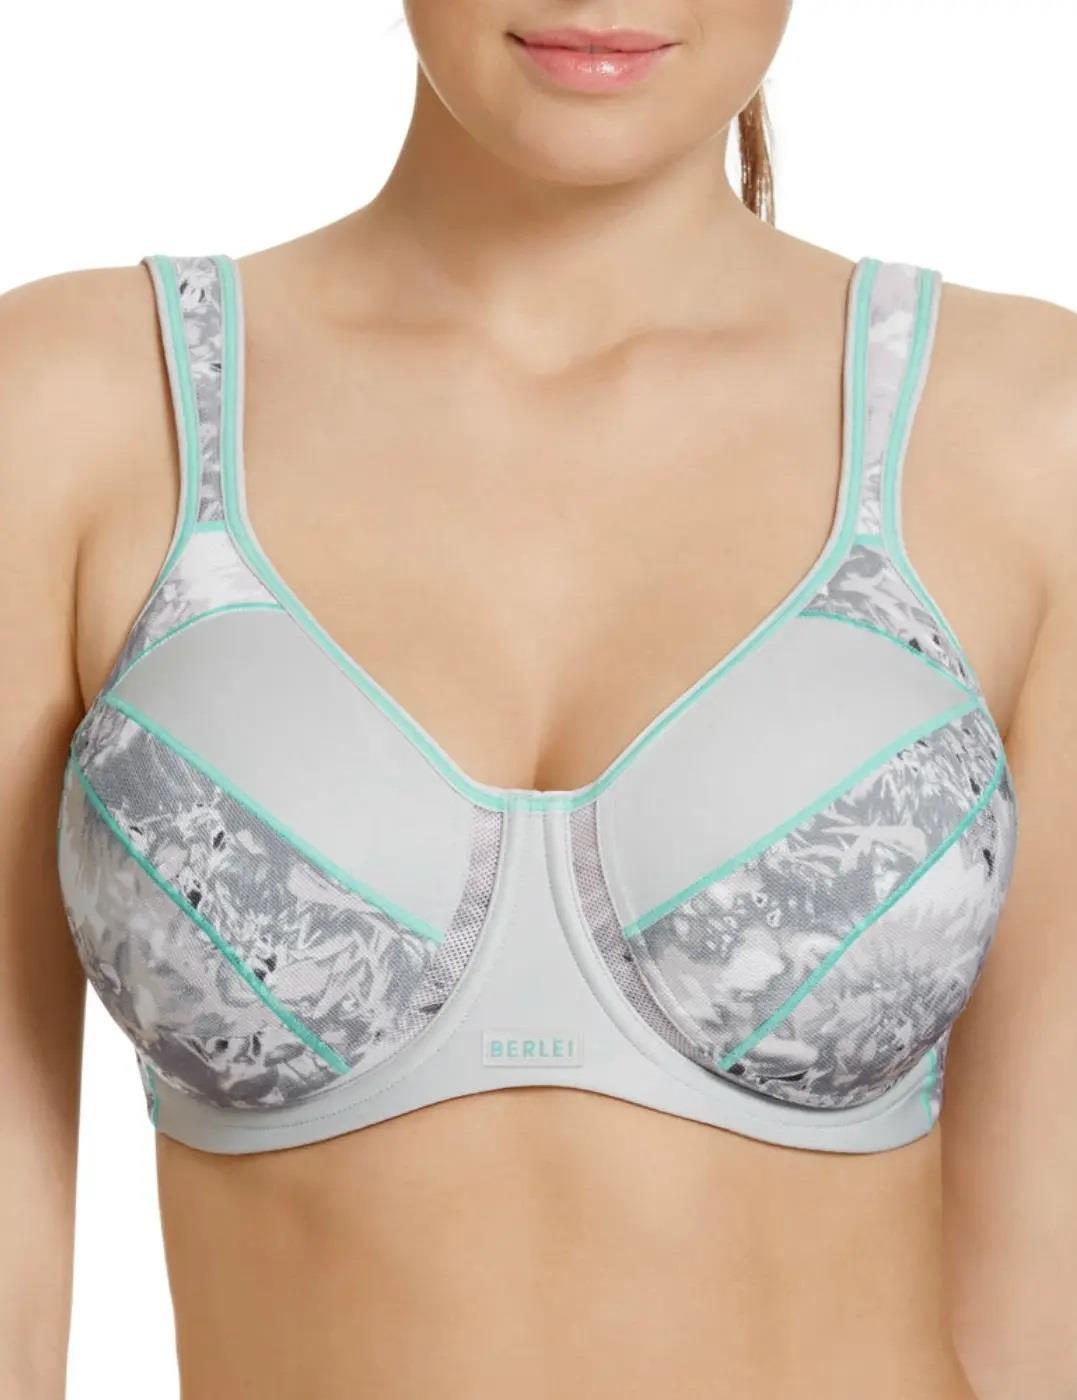 Berlei High Impact Sports Bra Full Support Underwired Non-Padded Multiway Grey